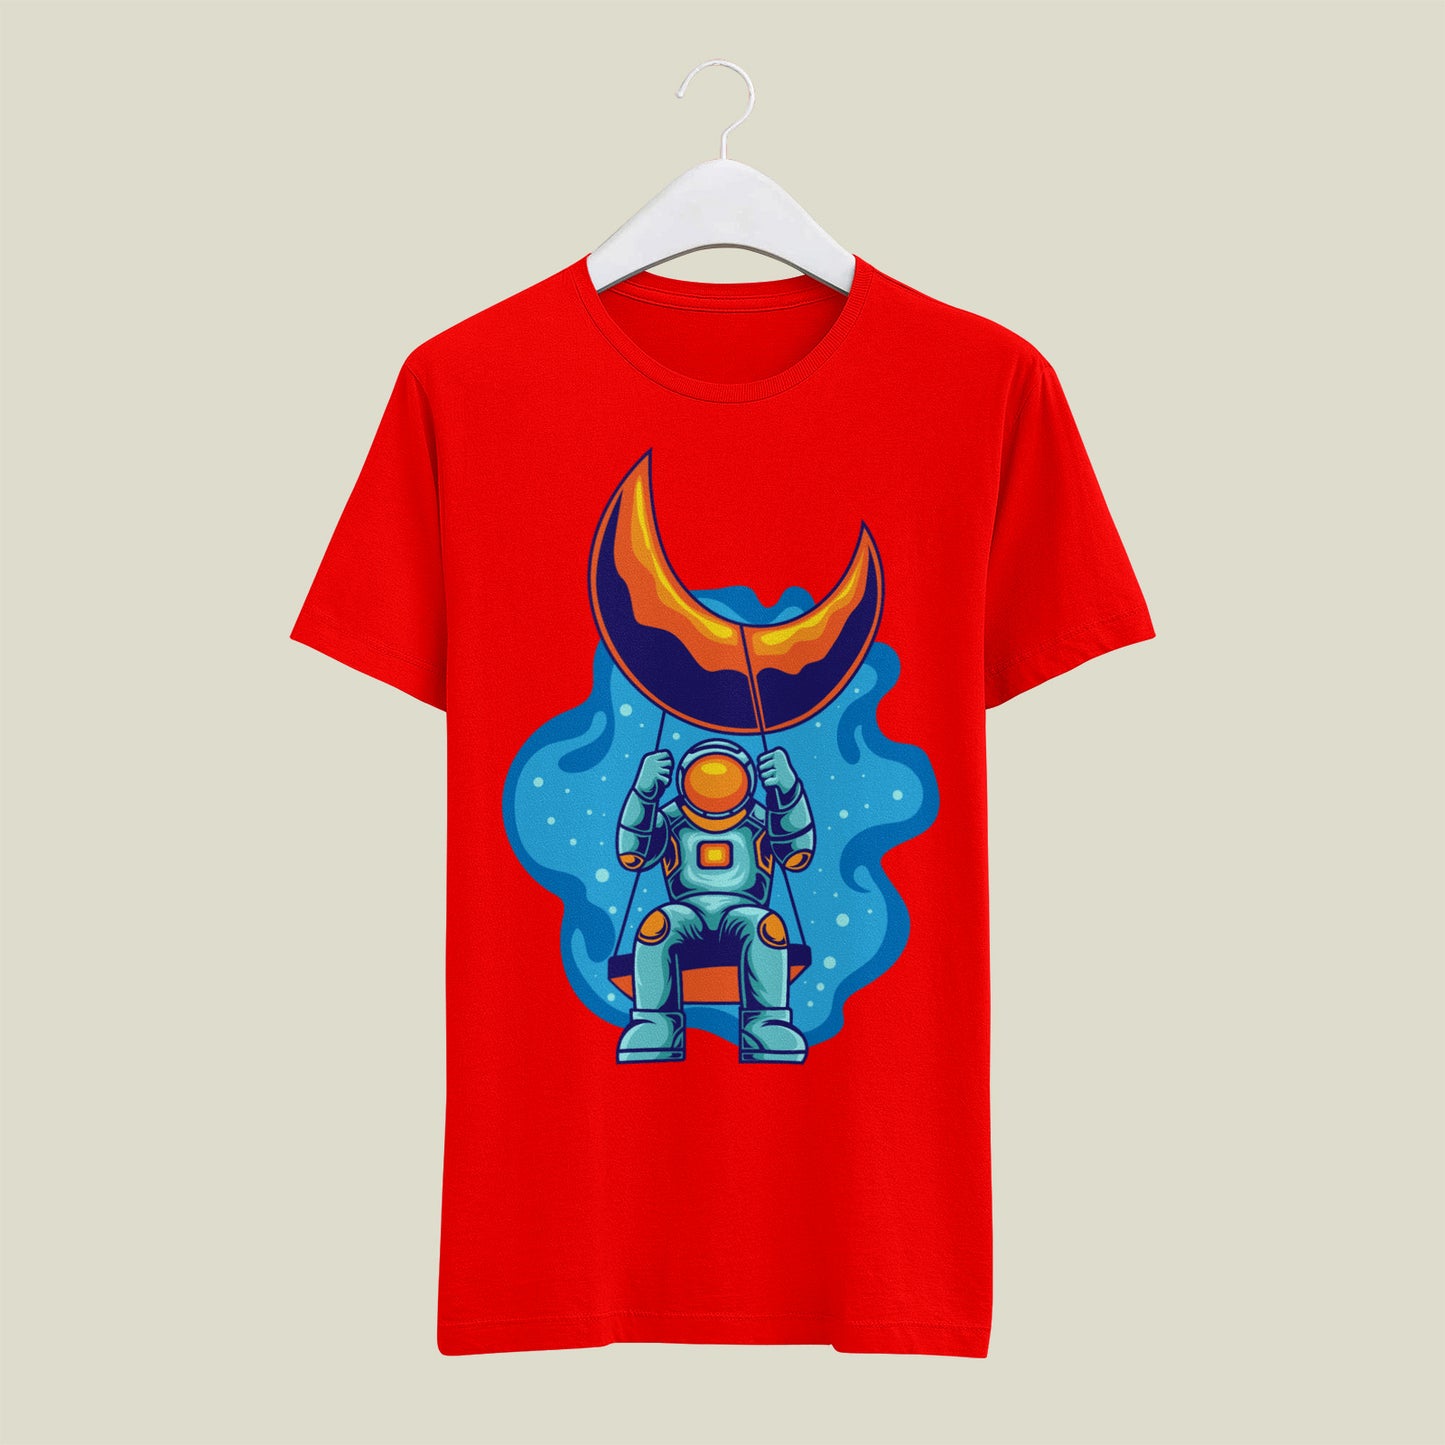 Astronaut-Playing-Swing-in-Space T-Shirt